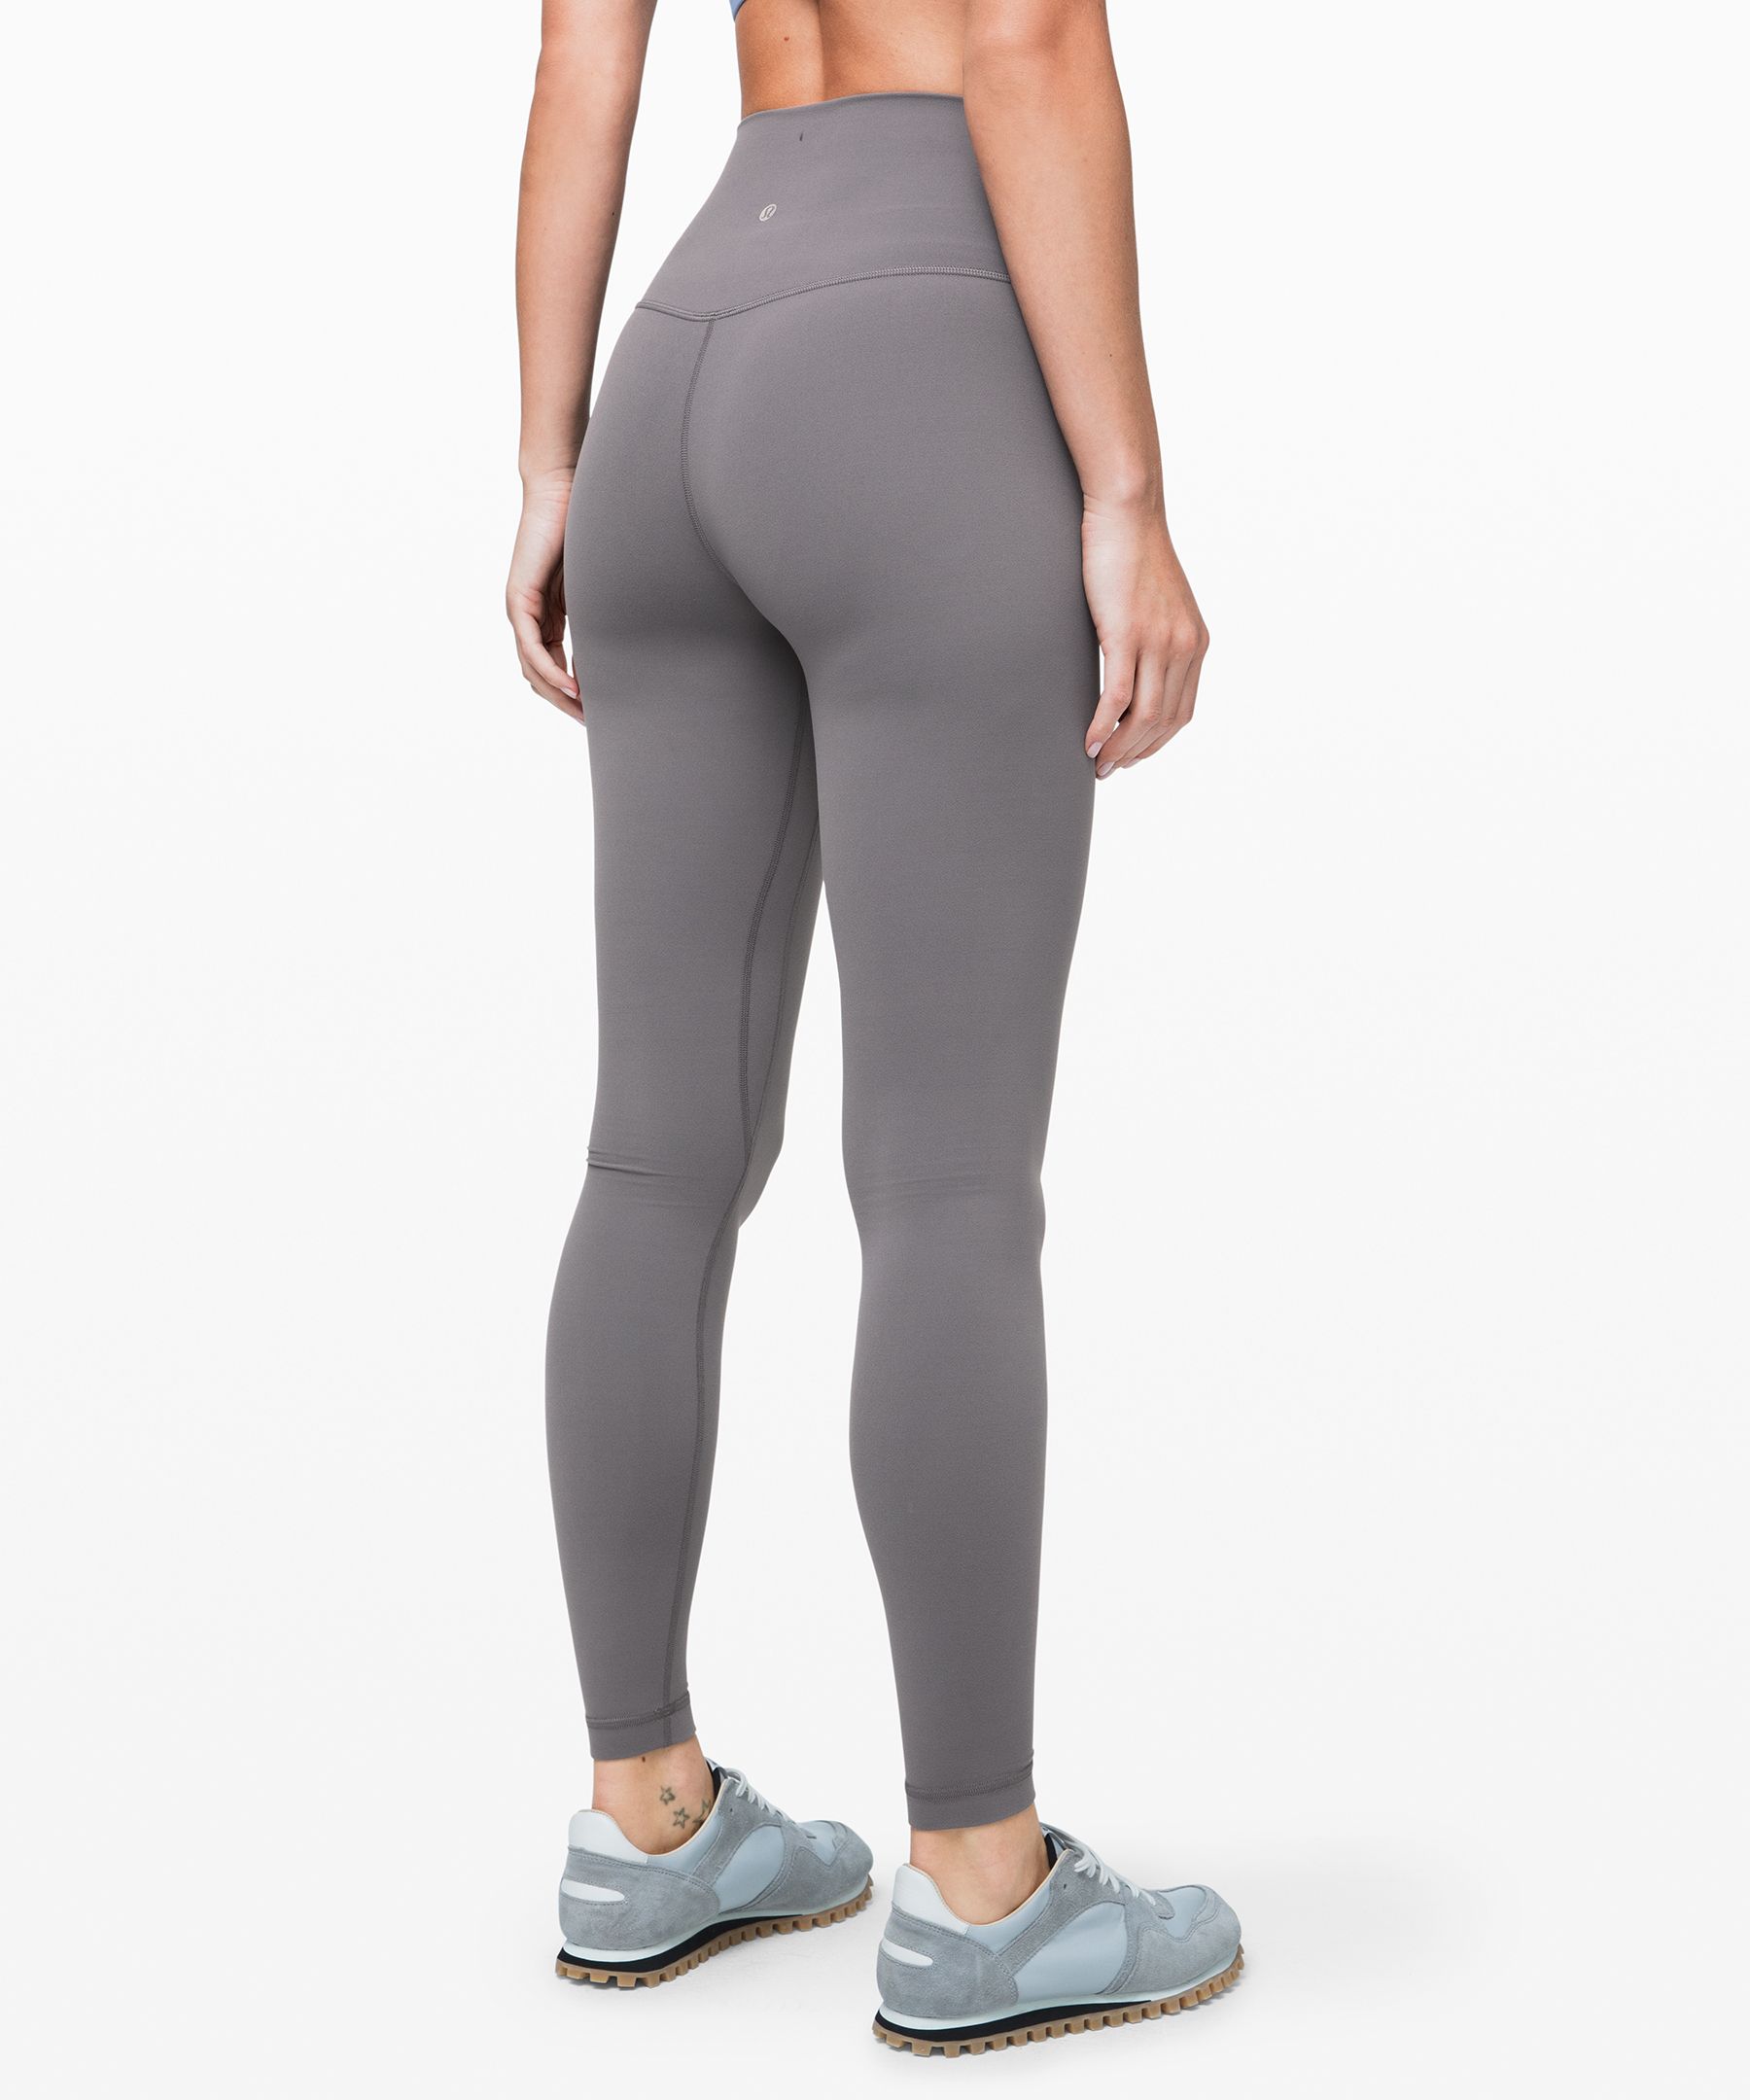 restock][US] Lululemon Align™ High-Rise Pant 28, size 2, 4, 6, and